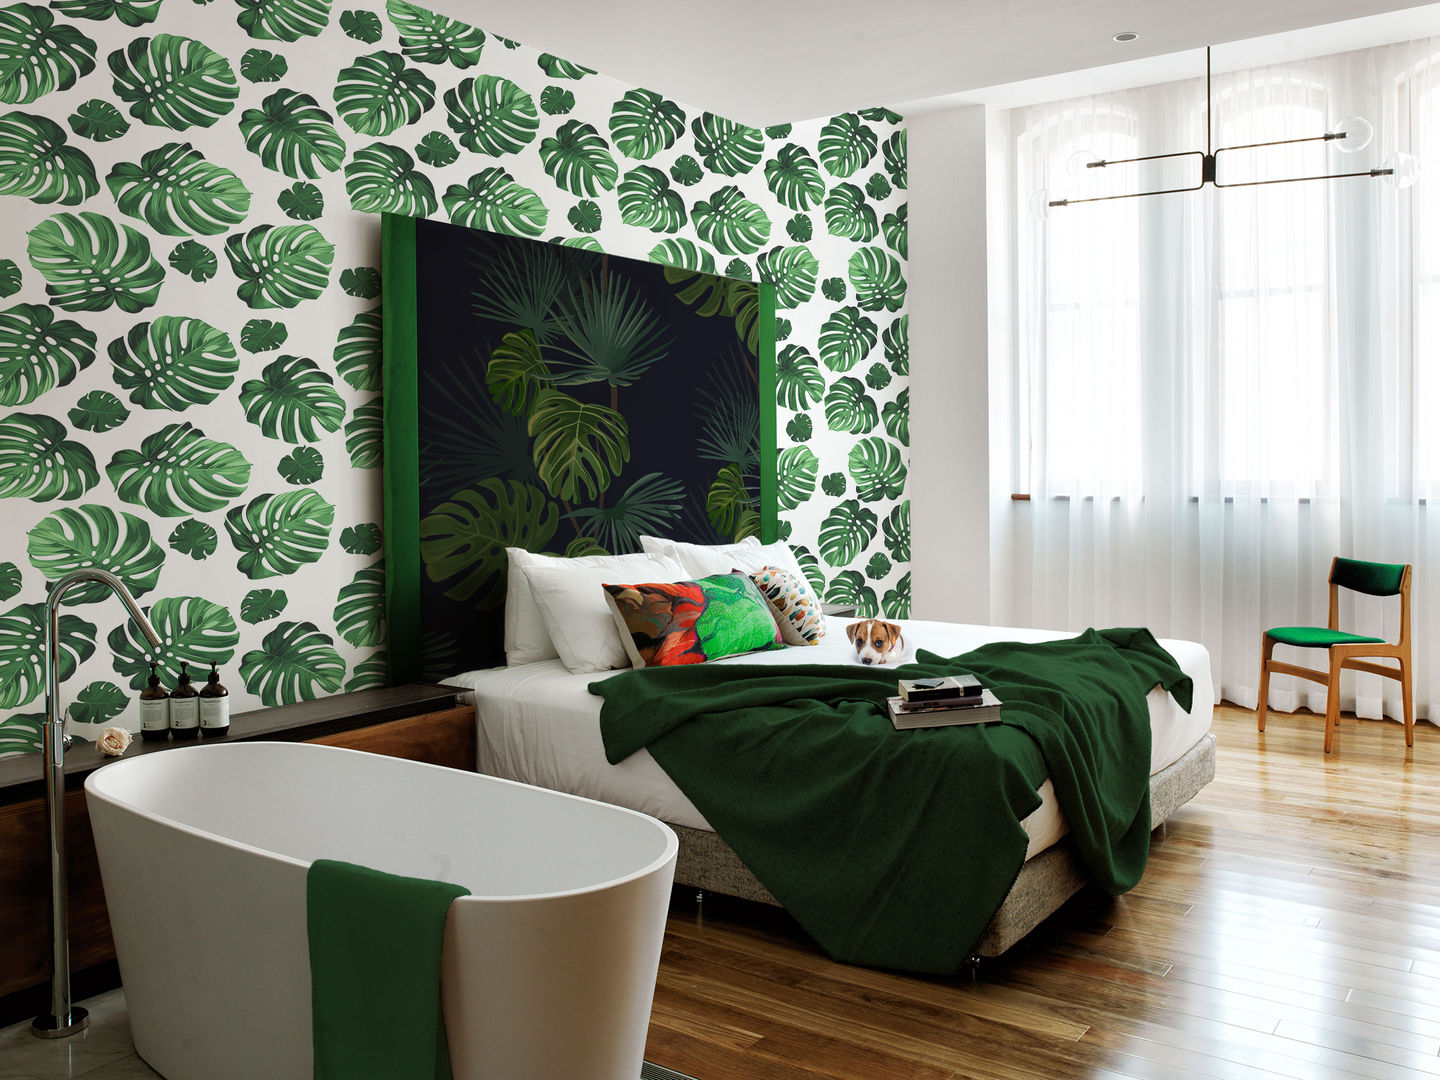 UNDER THE PALM LEAF Pixers Tropical style bedroom pantone 2017,greenery,green,Accessories & decoration